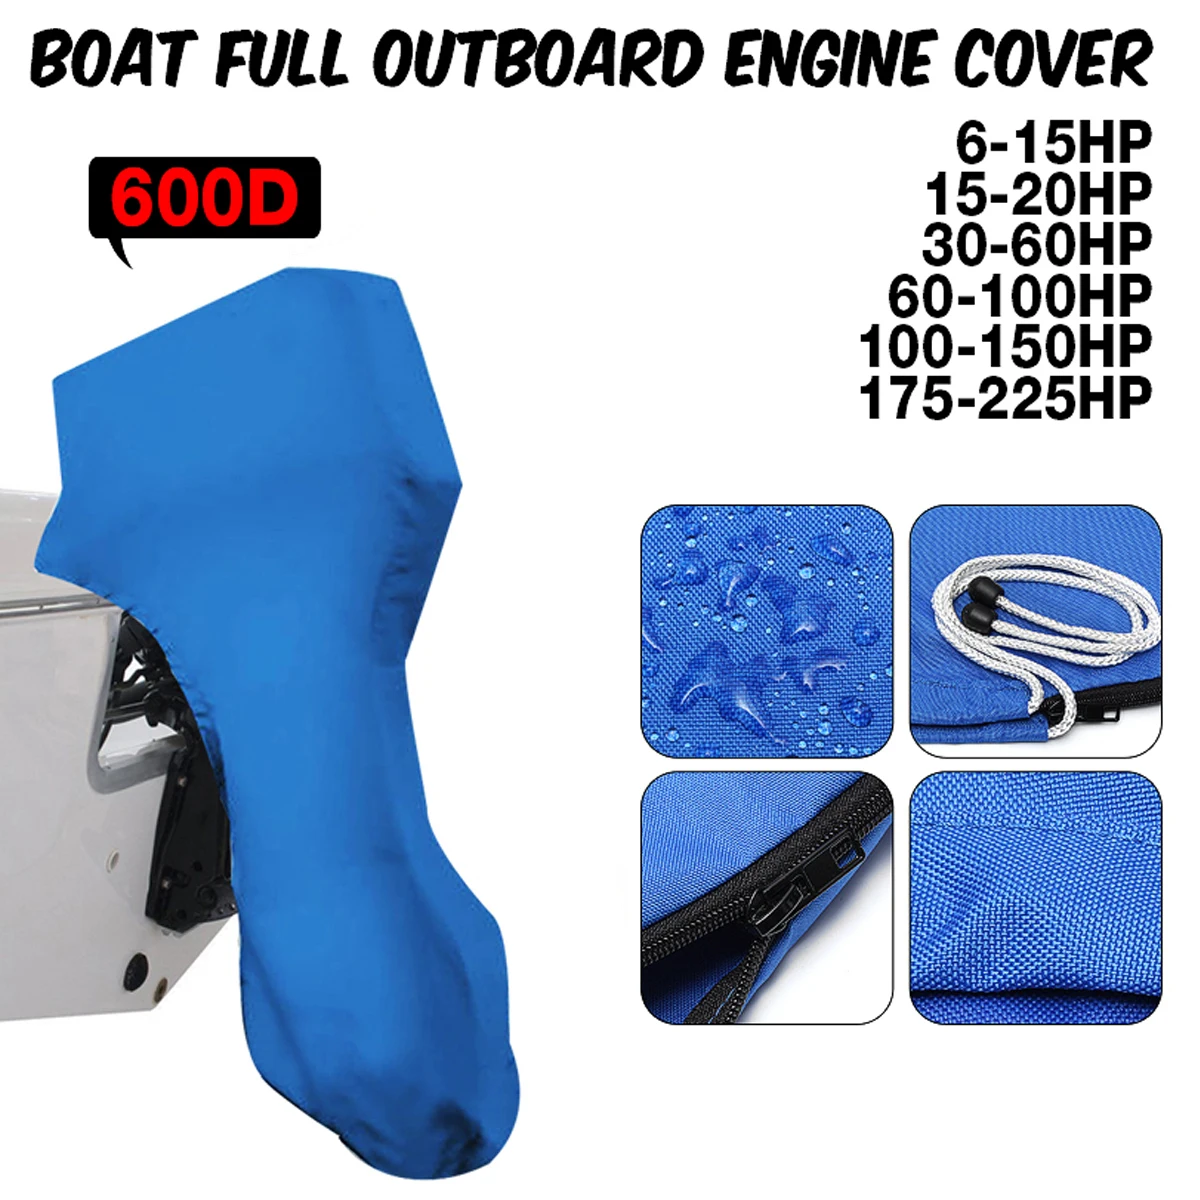 

New 600D Boat Full Outboard Engine Cover Engine Motor Covers Protector Blue For 6-225HP Waterproof